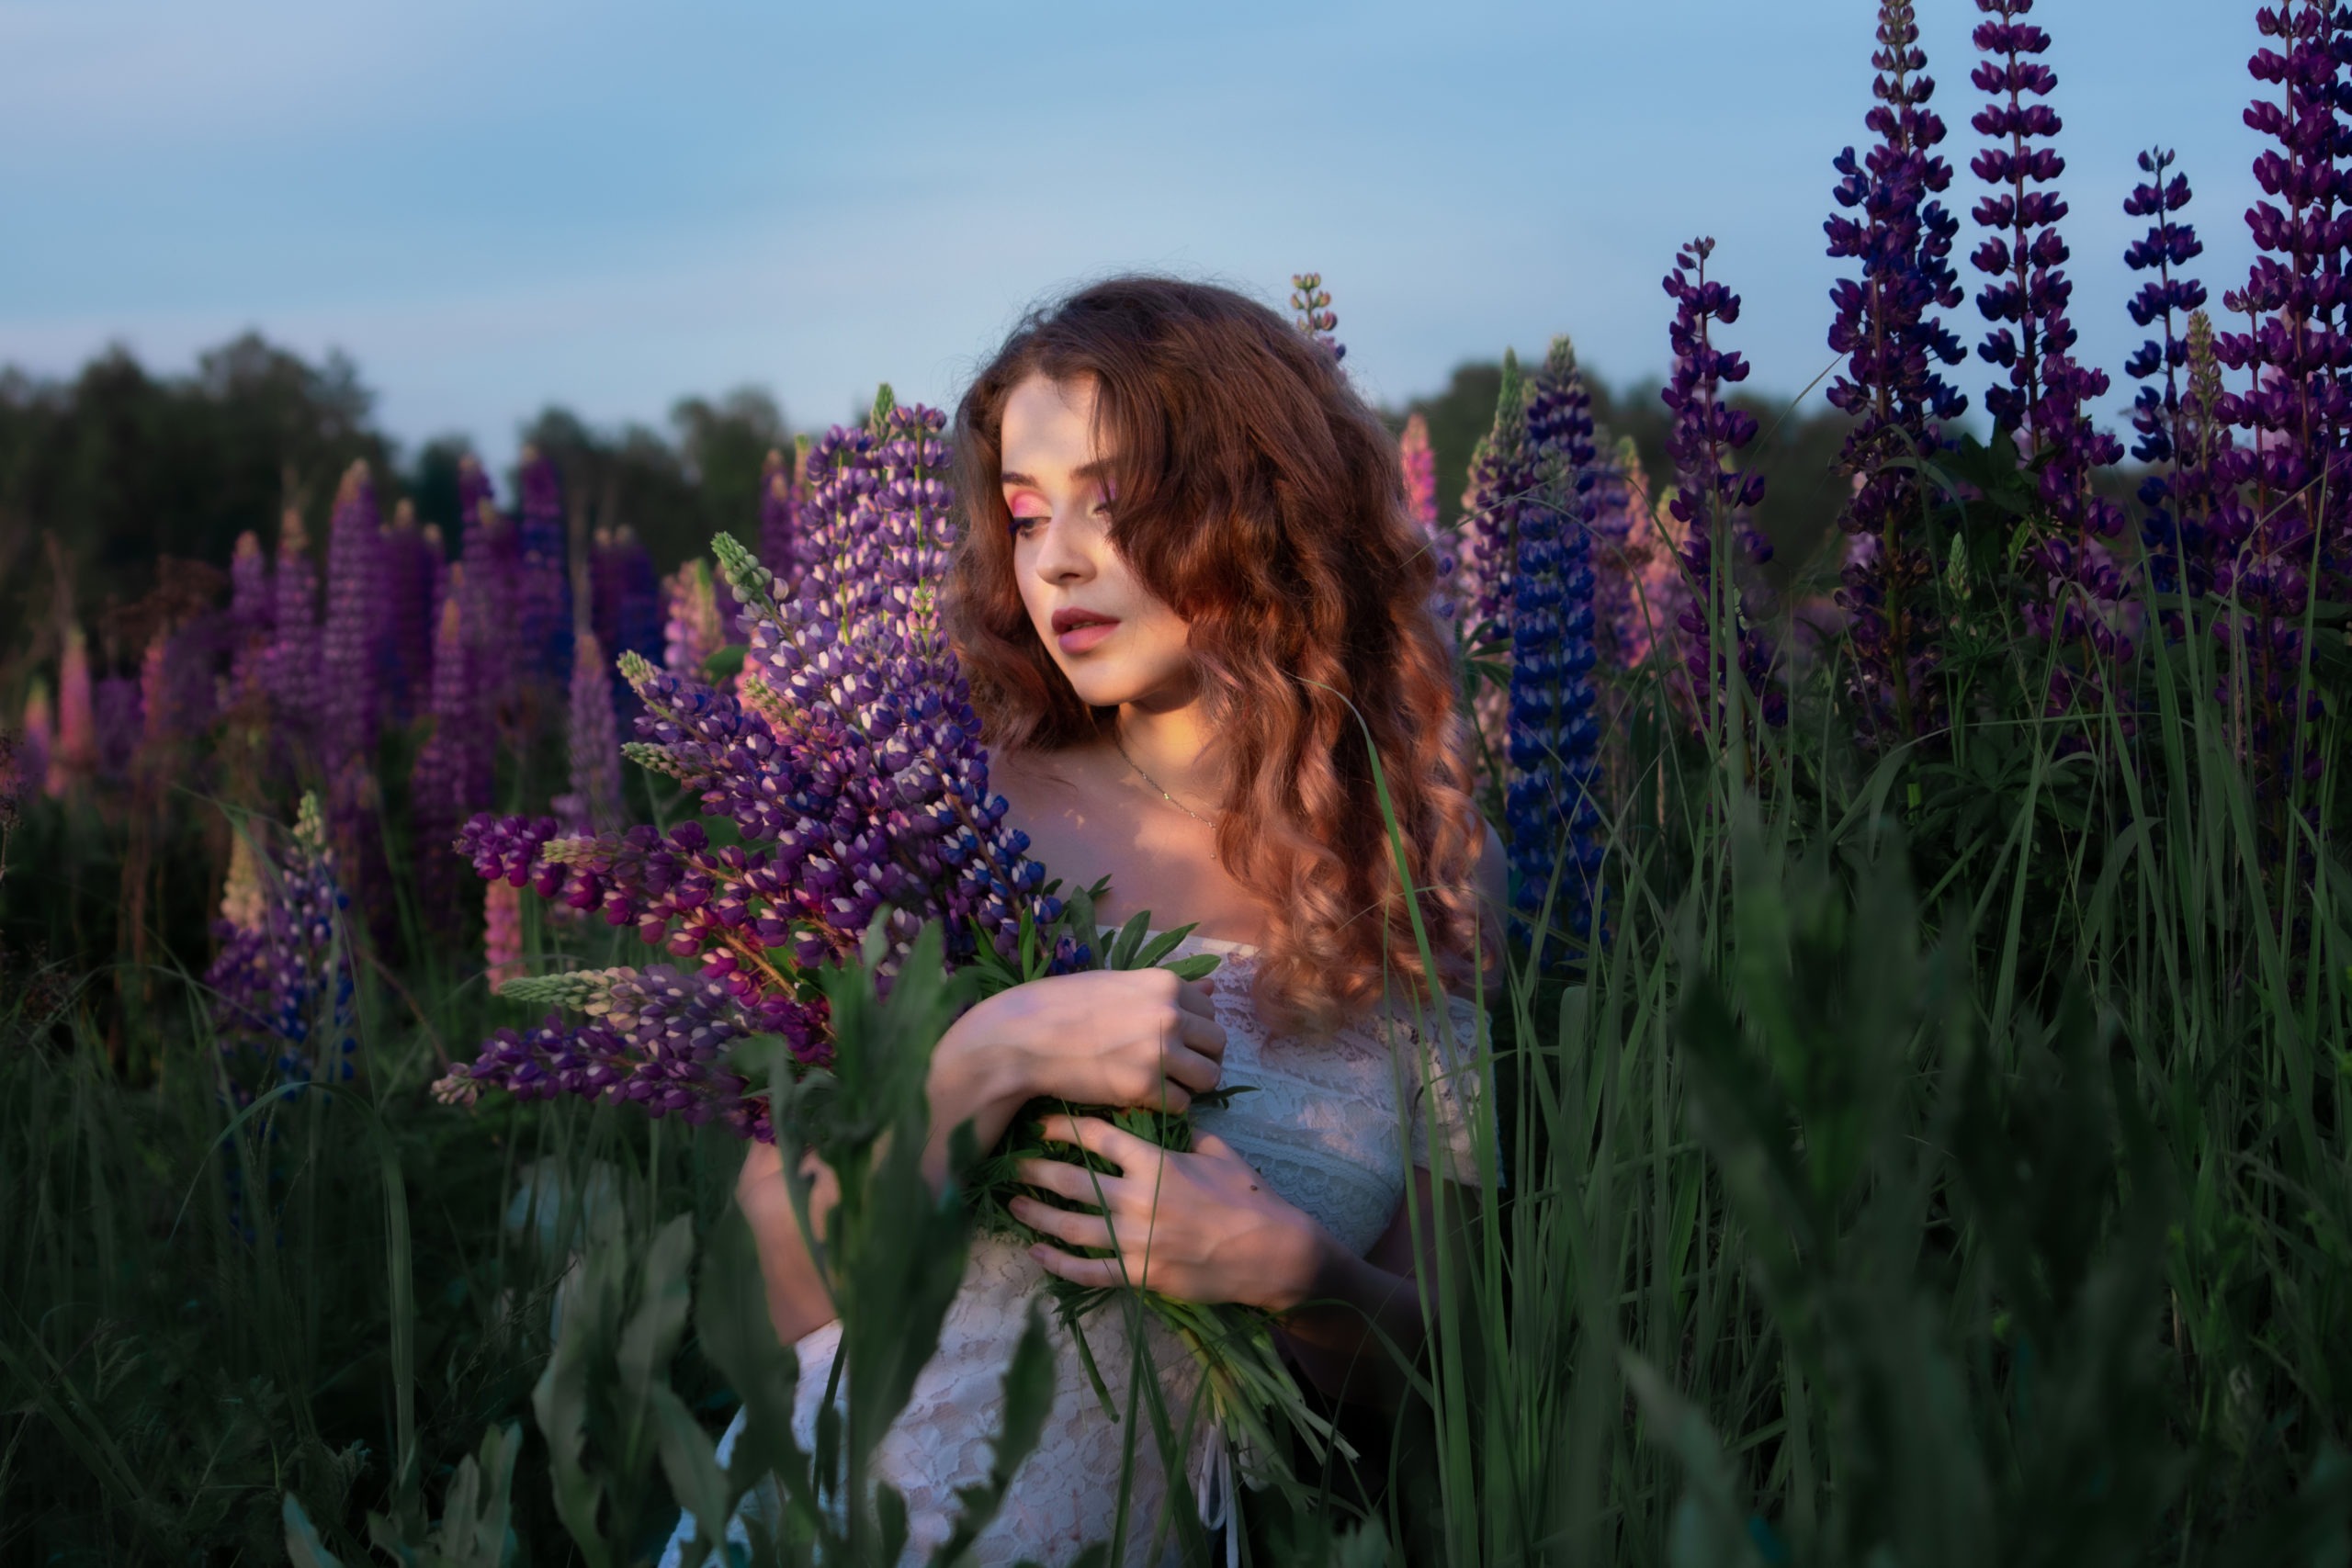 Beautiful, lovely girl among the purple flowers in the field.